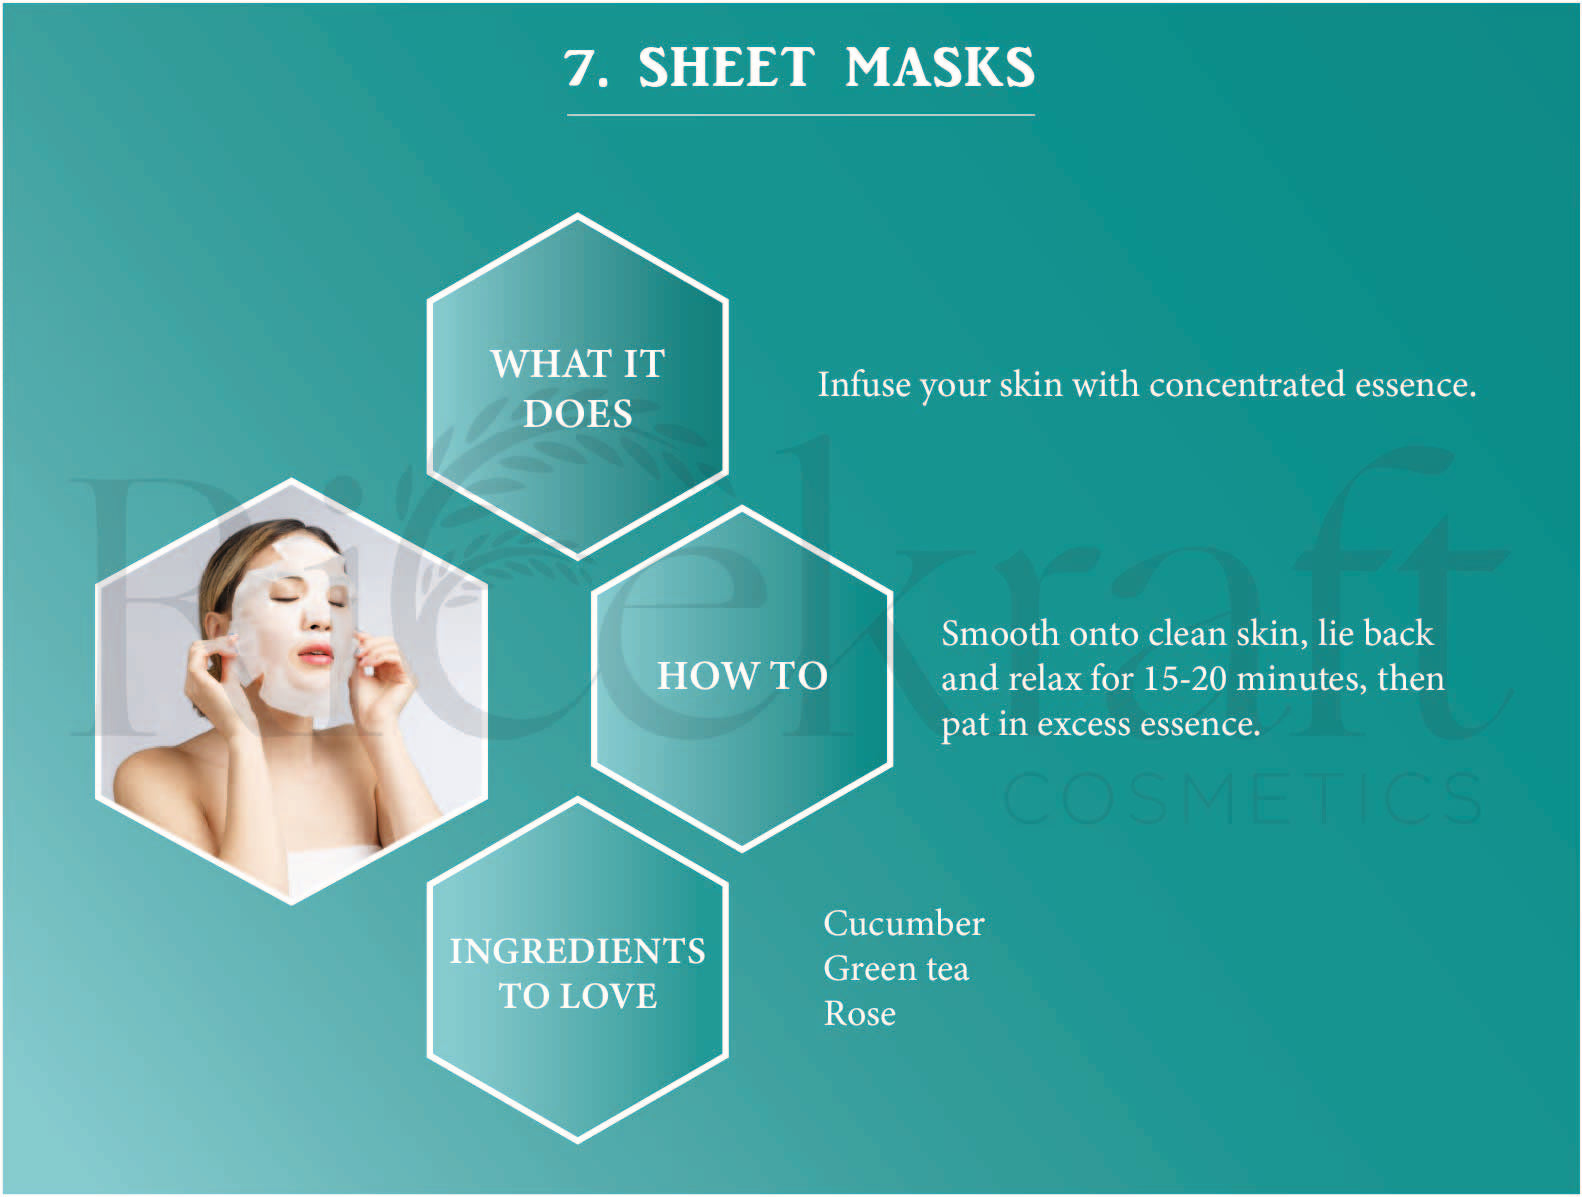 "Sheet mask with Cucumber, Green tea, and Rose essence for radiant skin."